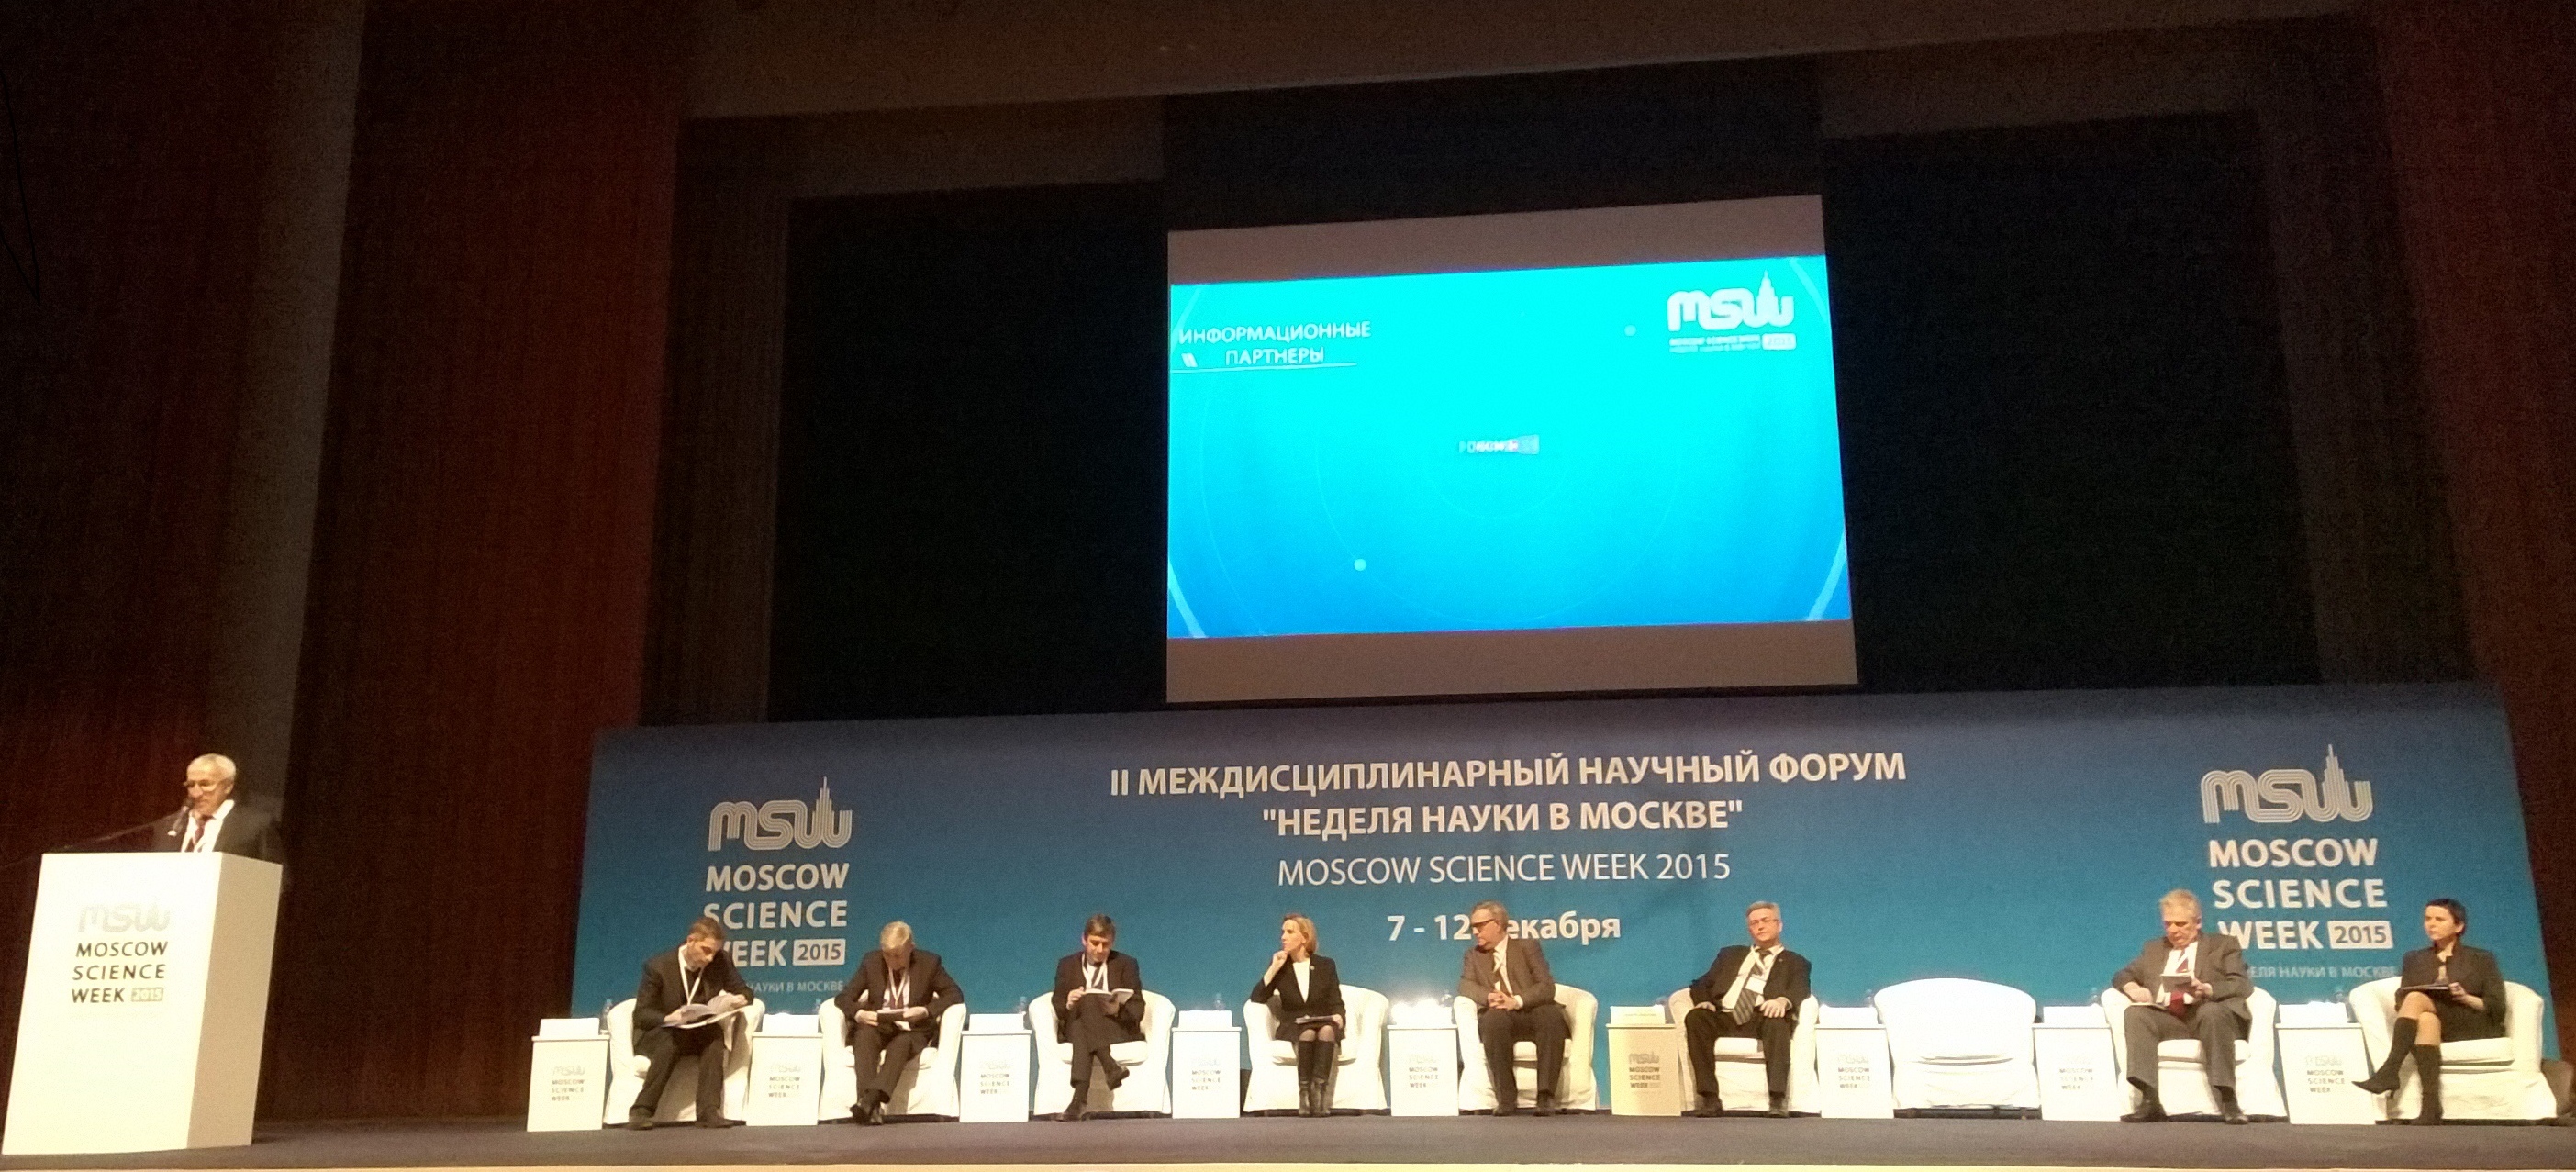 Пленарное заседание Moscow Science Week 2015, 9.12.2015